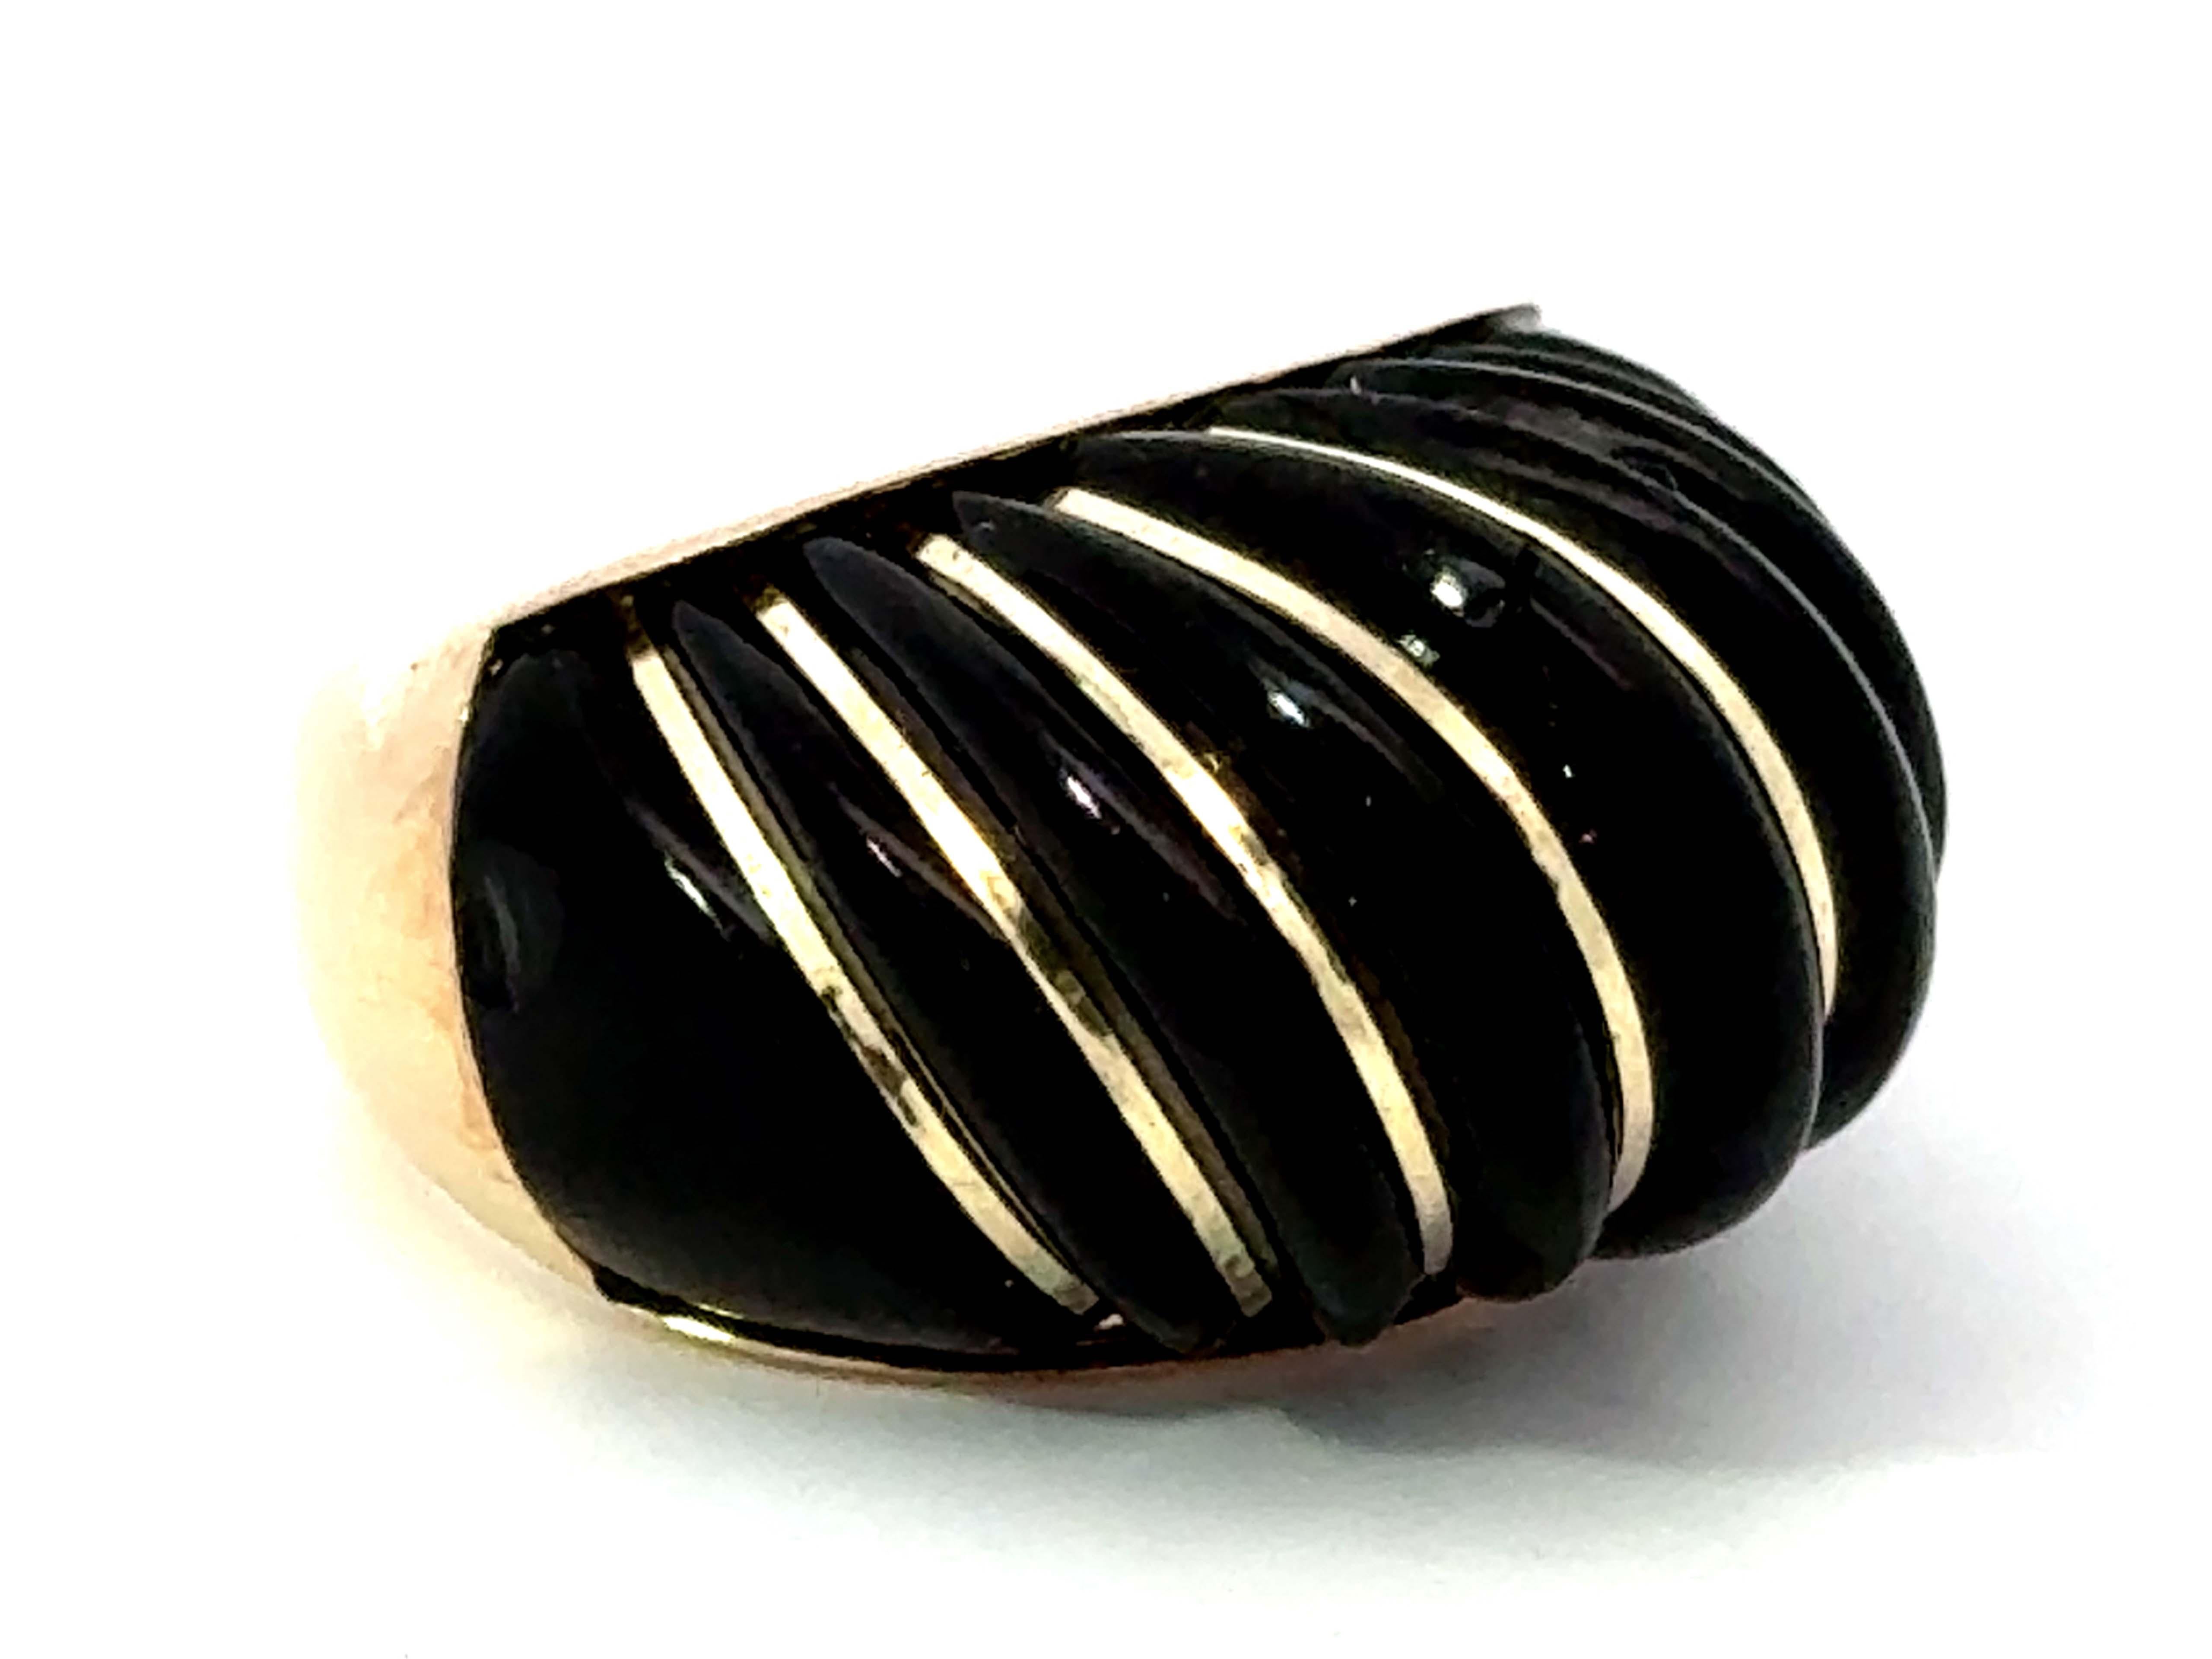 Item Specifications:

Metal: 14K Yellow Gold

Ring Size: 5 (resizing available for a fee)

Total Weight: 5.9 Grams

Gemstone Specifications:

Center Gemstone: Onyx

Color: Black

Condition: Excellent, Preowned
​
​Stamped: 